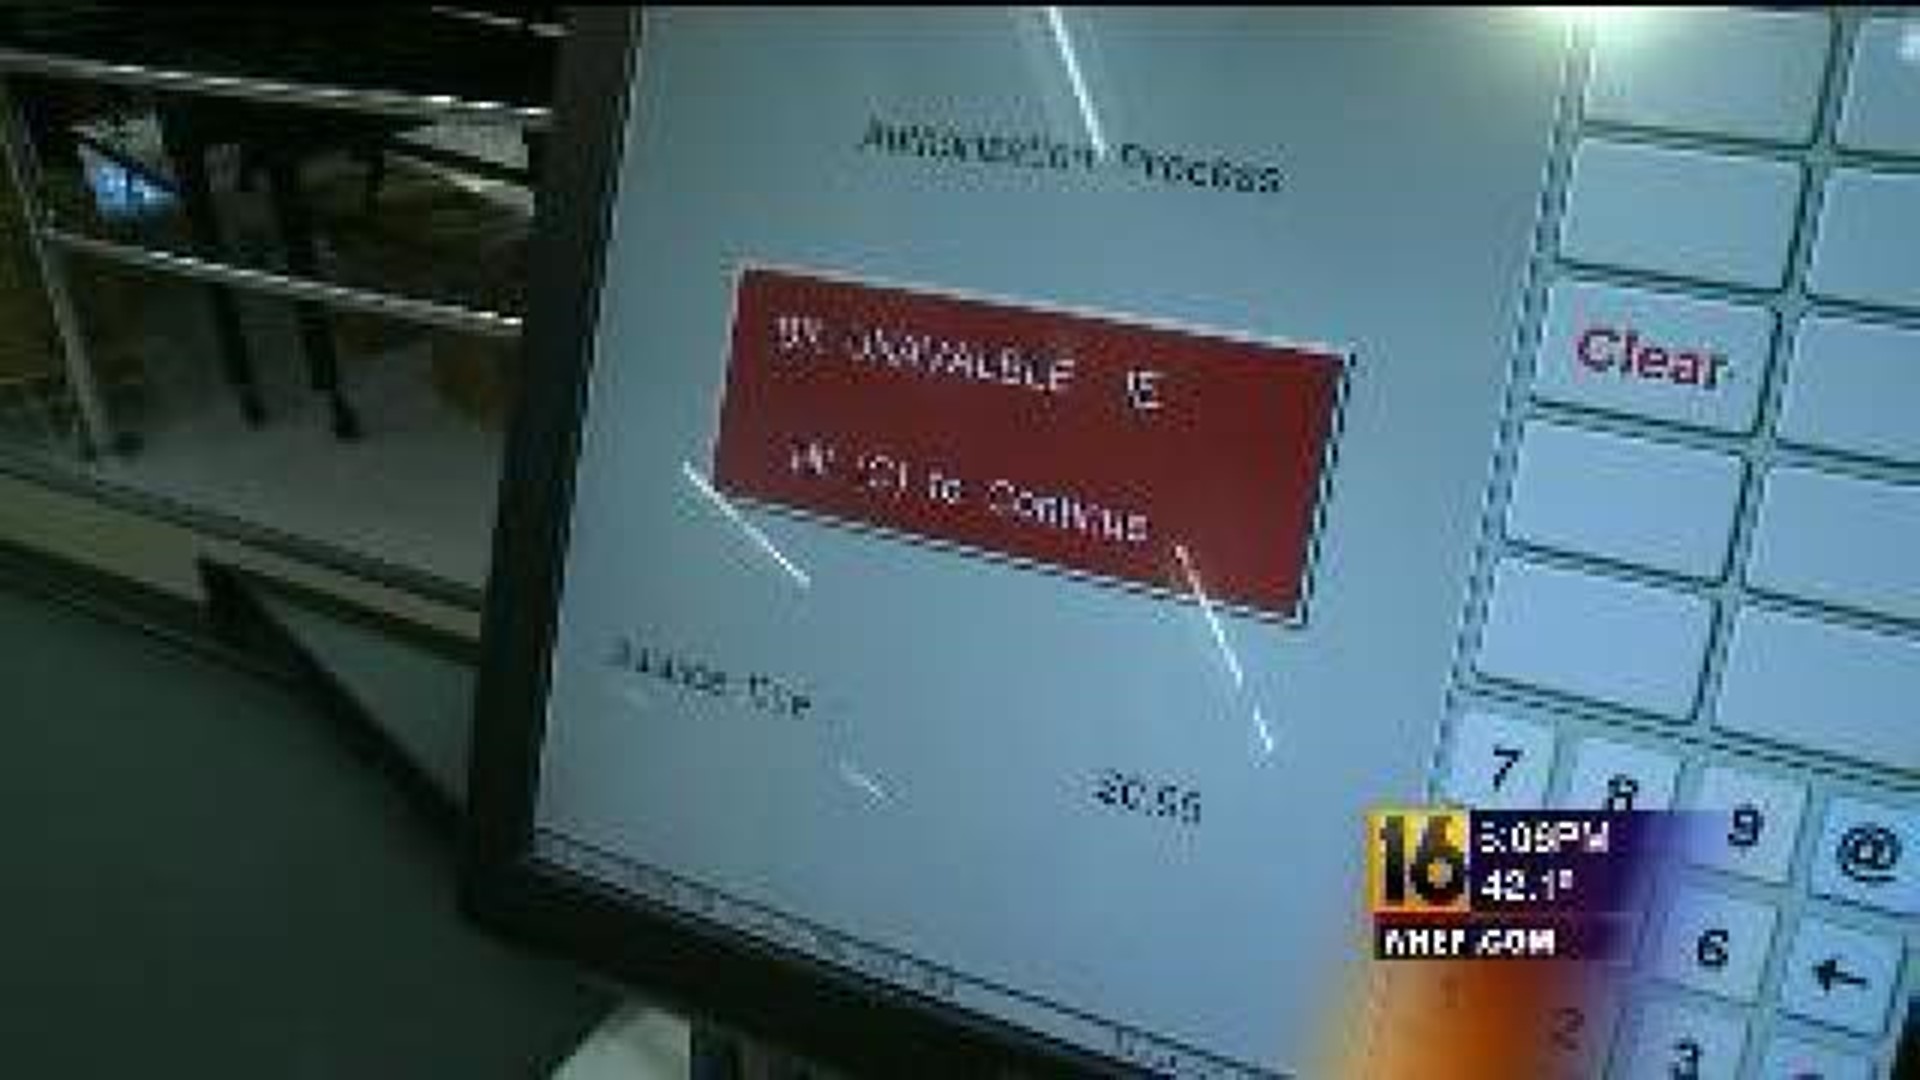 Access Card Outage Causes Problems at Stores